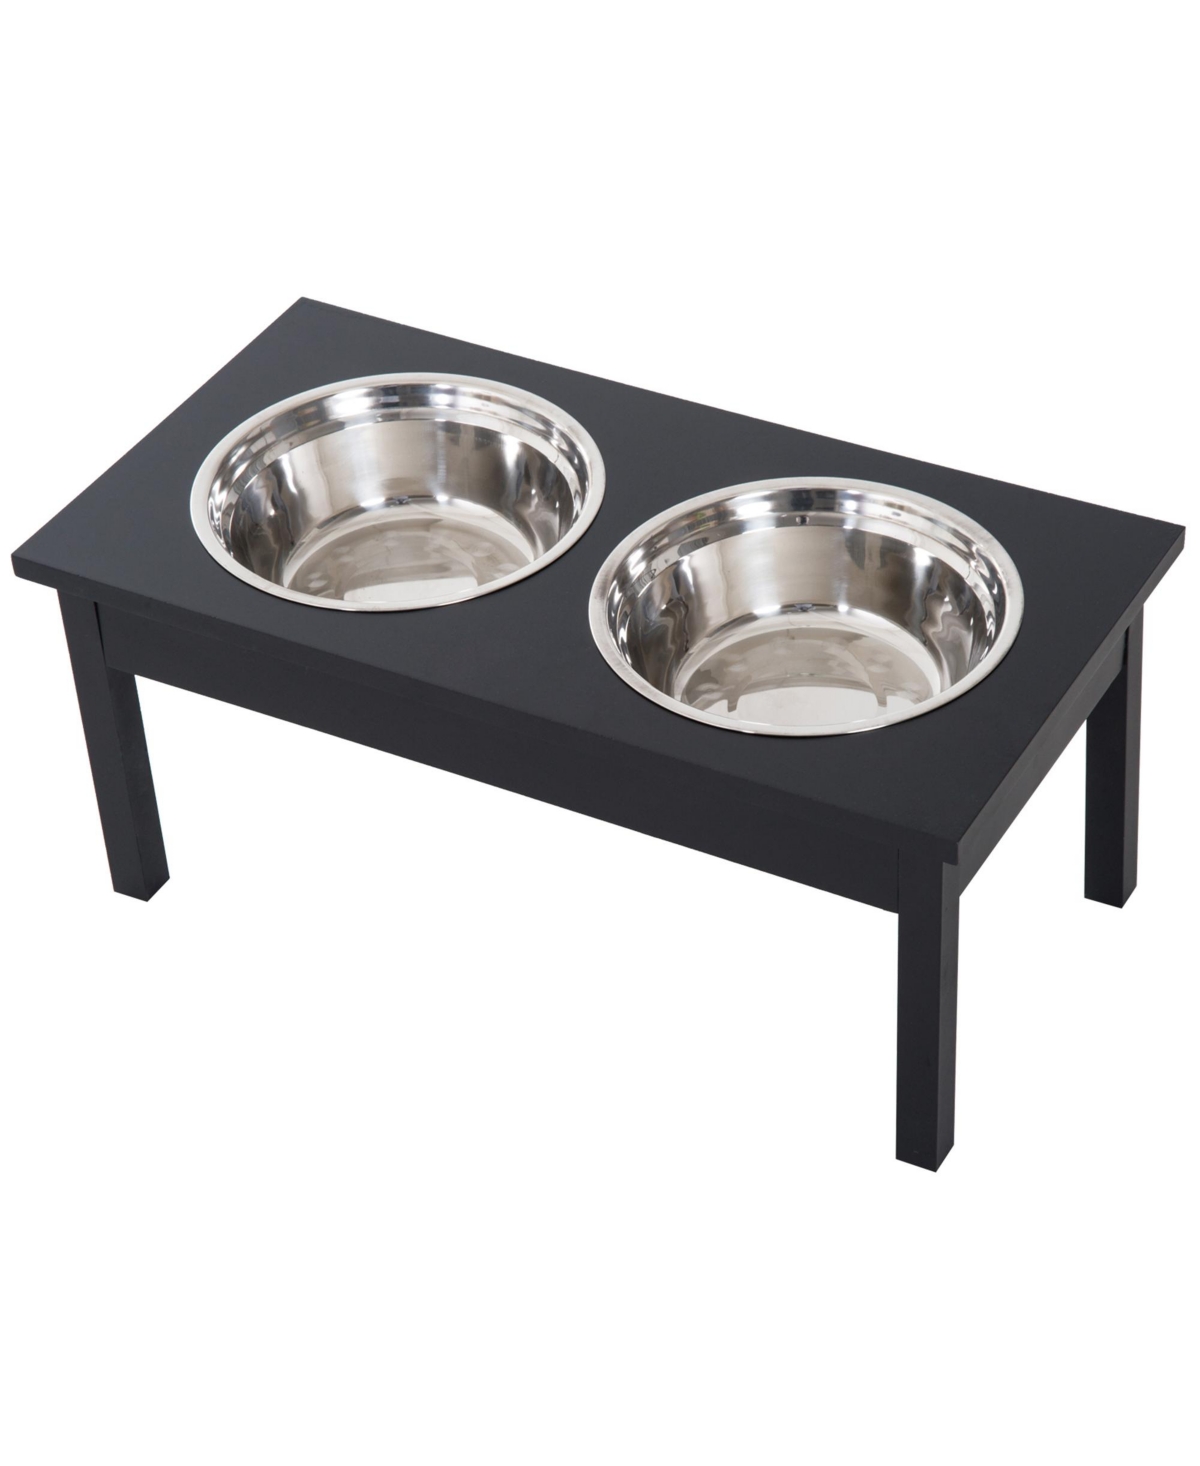 10" Elevated Raised Dog Feeder Stainless Steel Double Bowl Food Water - Black